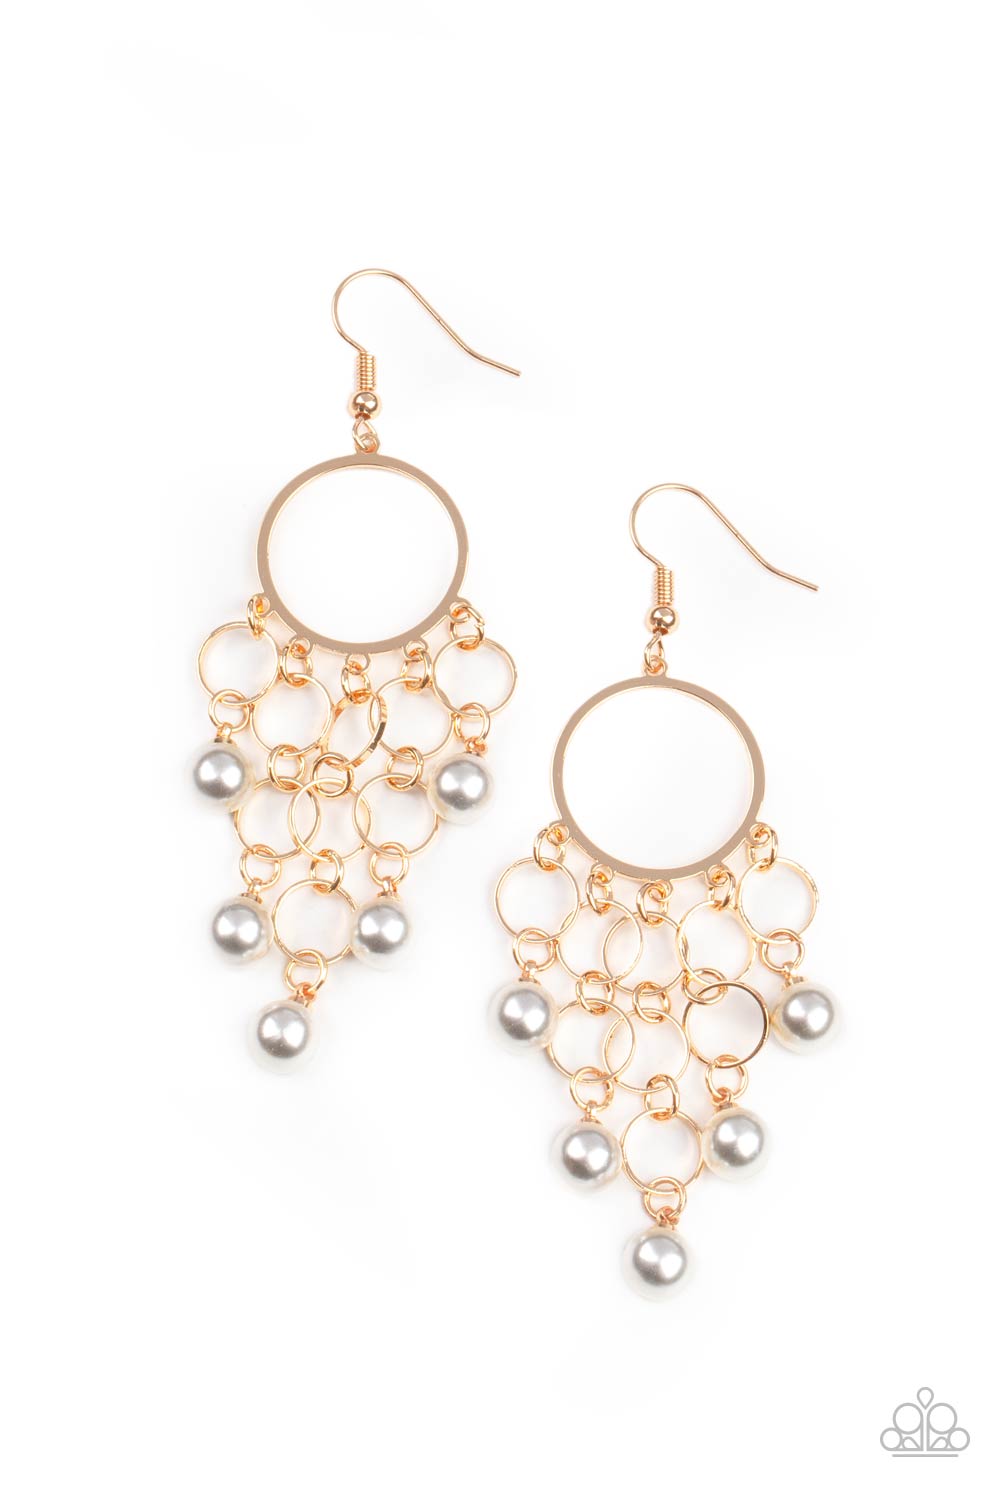 Paparazzi Accessories When Life Gives You Pearls - Gold Earrings - Lady T Accessories